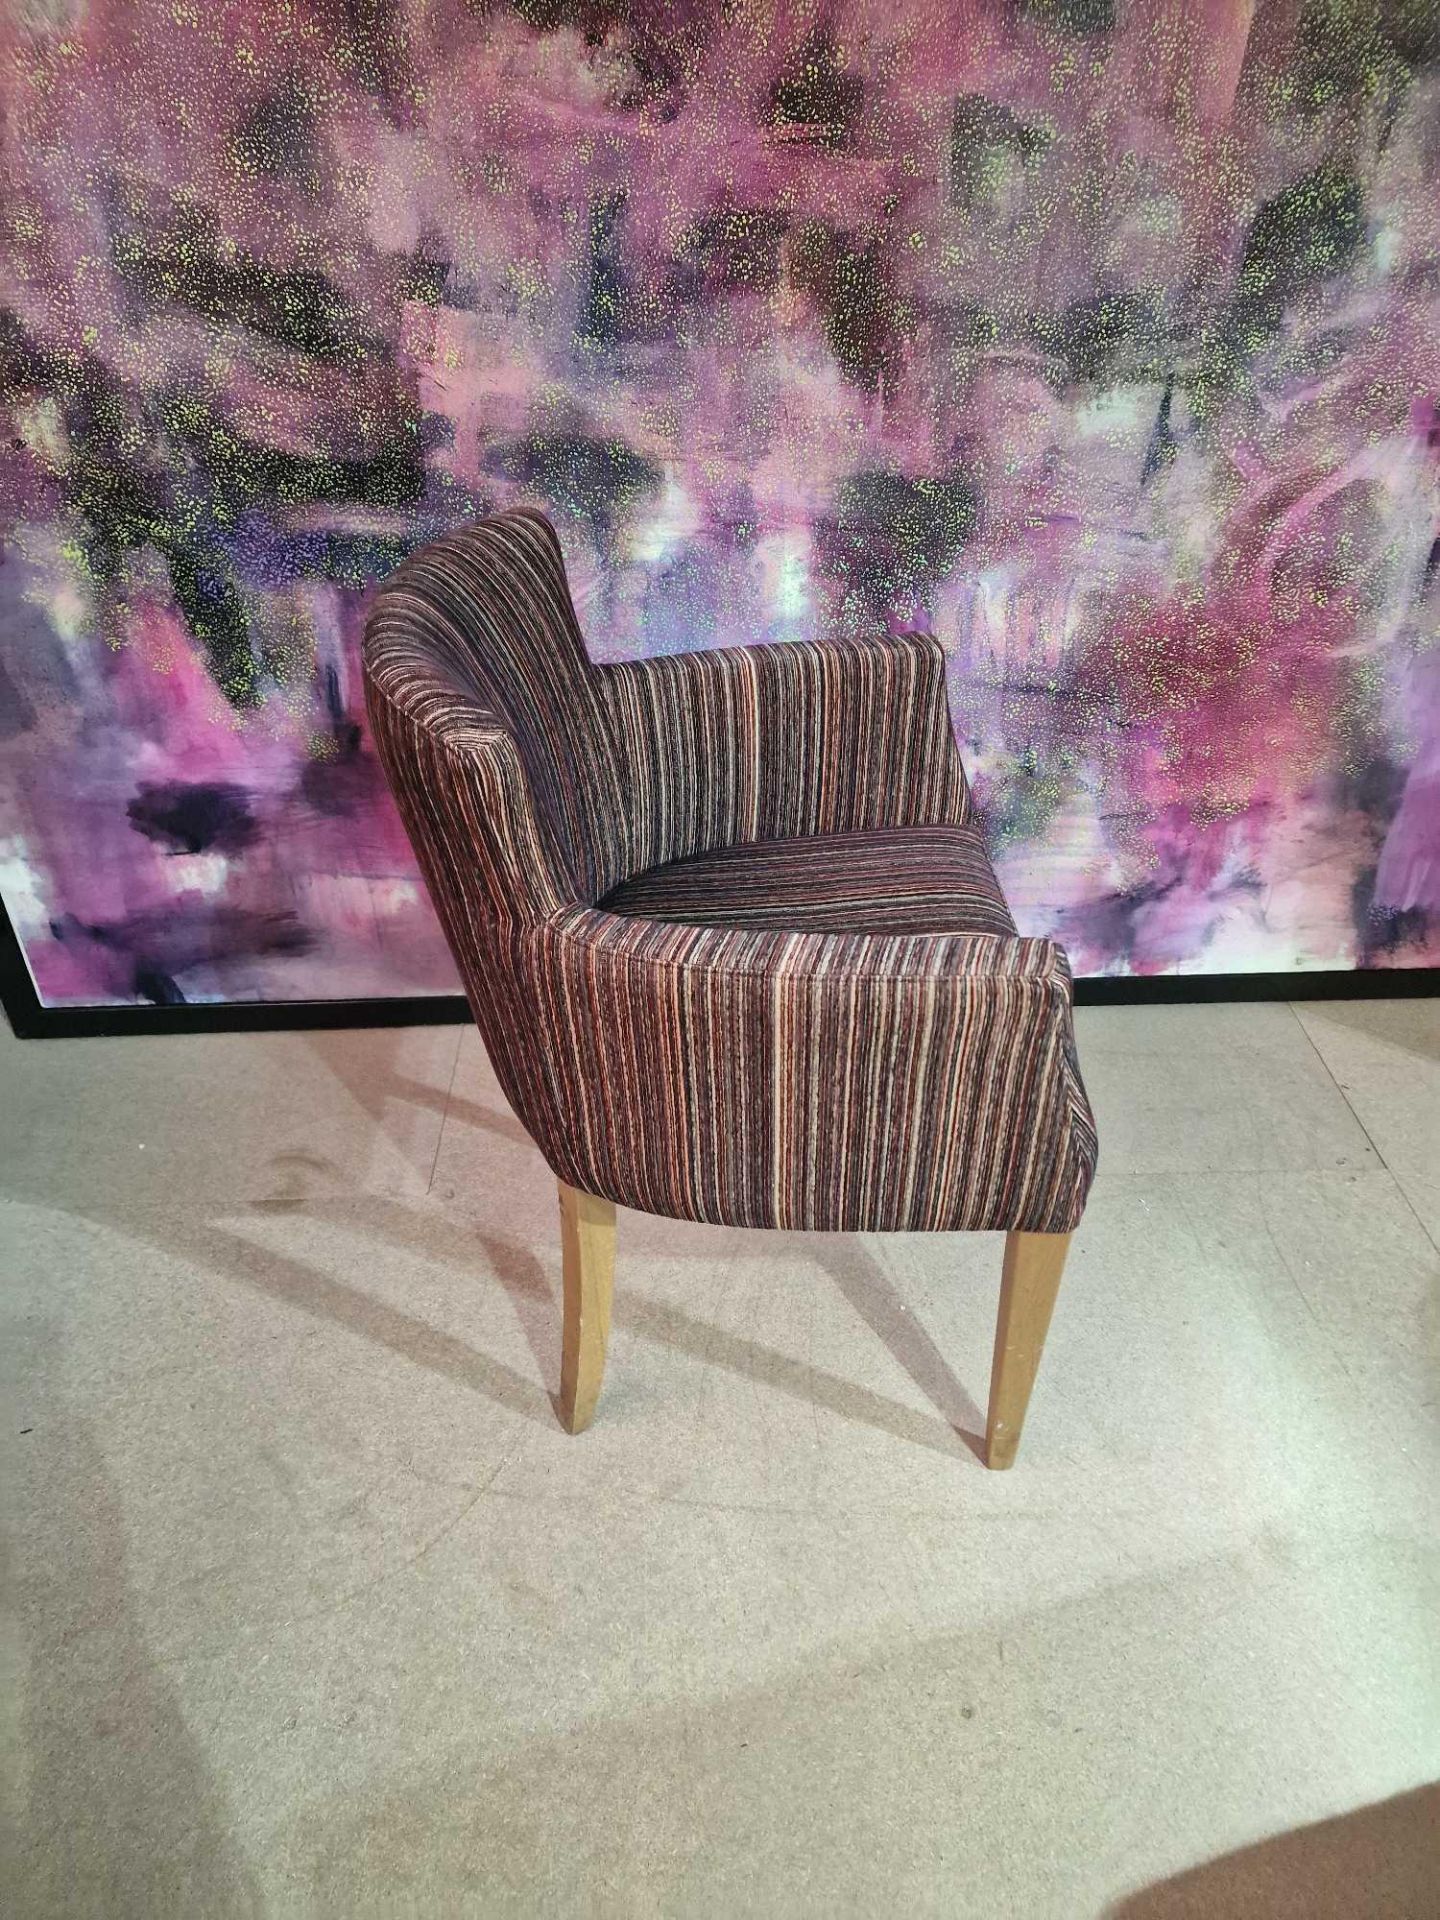 Contemporary dining chair Upholstered in a modern striped pattern fabric, the high arm rests and - Image 4 of 4